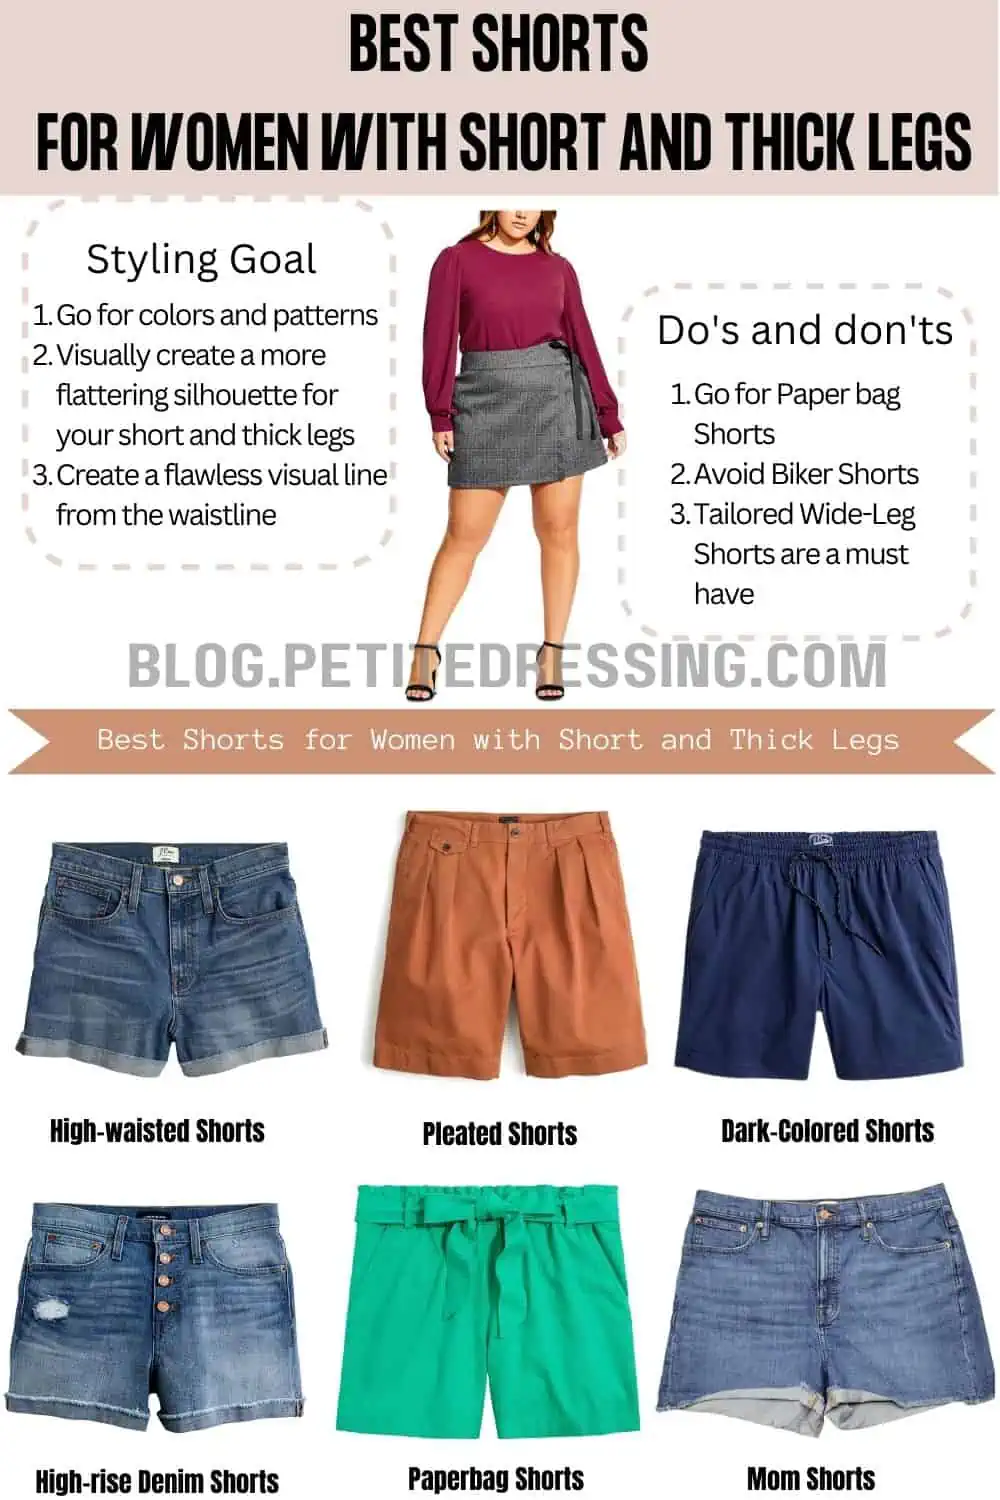 Shorts Style Guide for Women with Short and Thick Legs - Petite